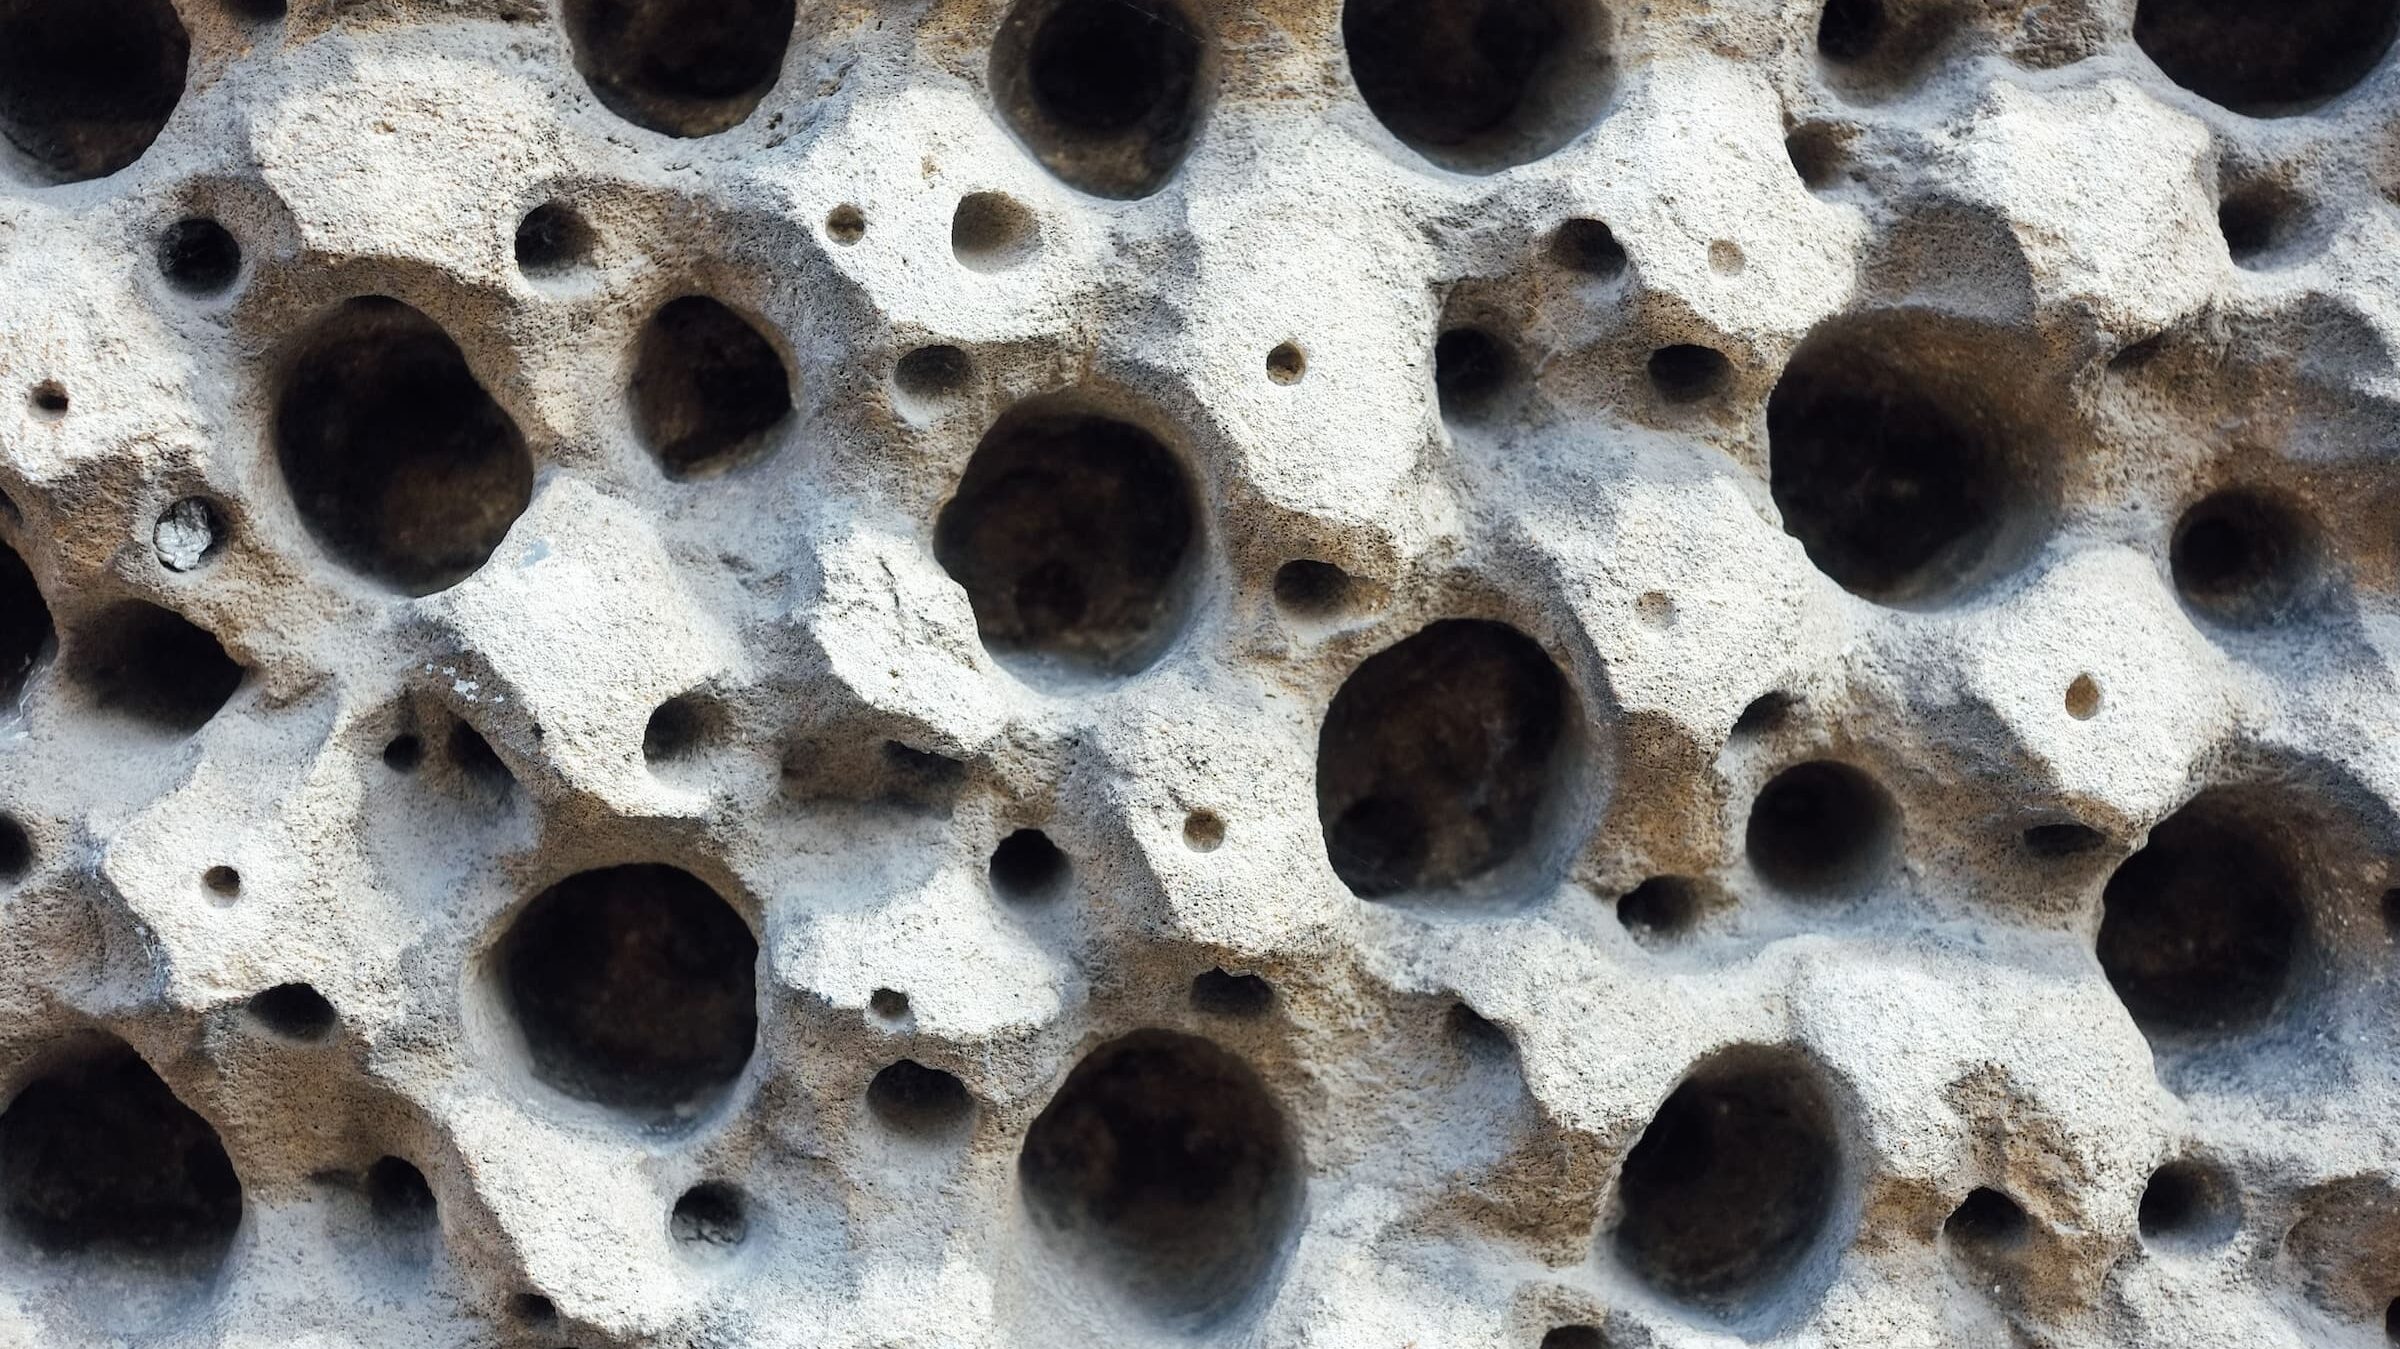 Close-up of a rock face full of holes